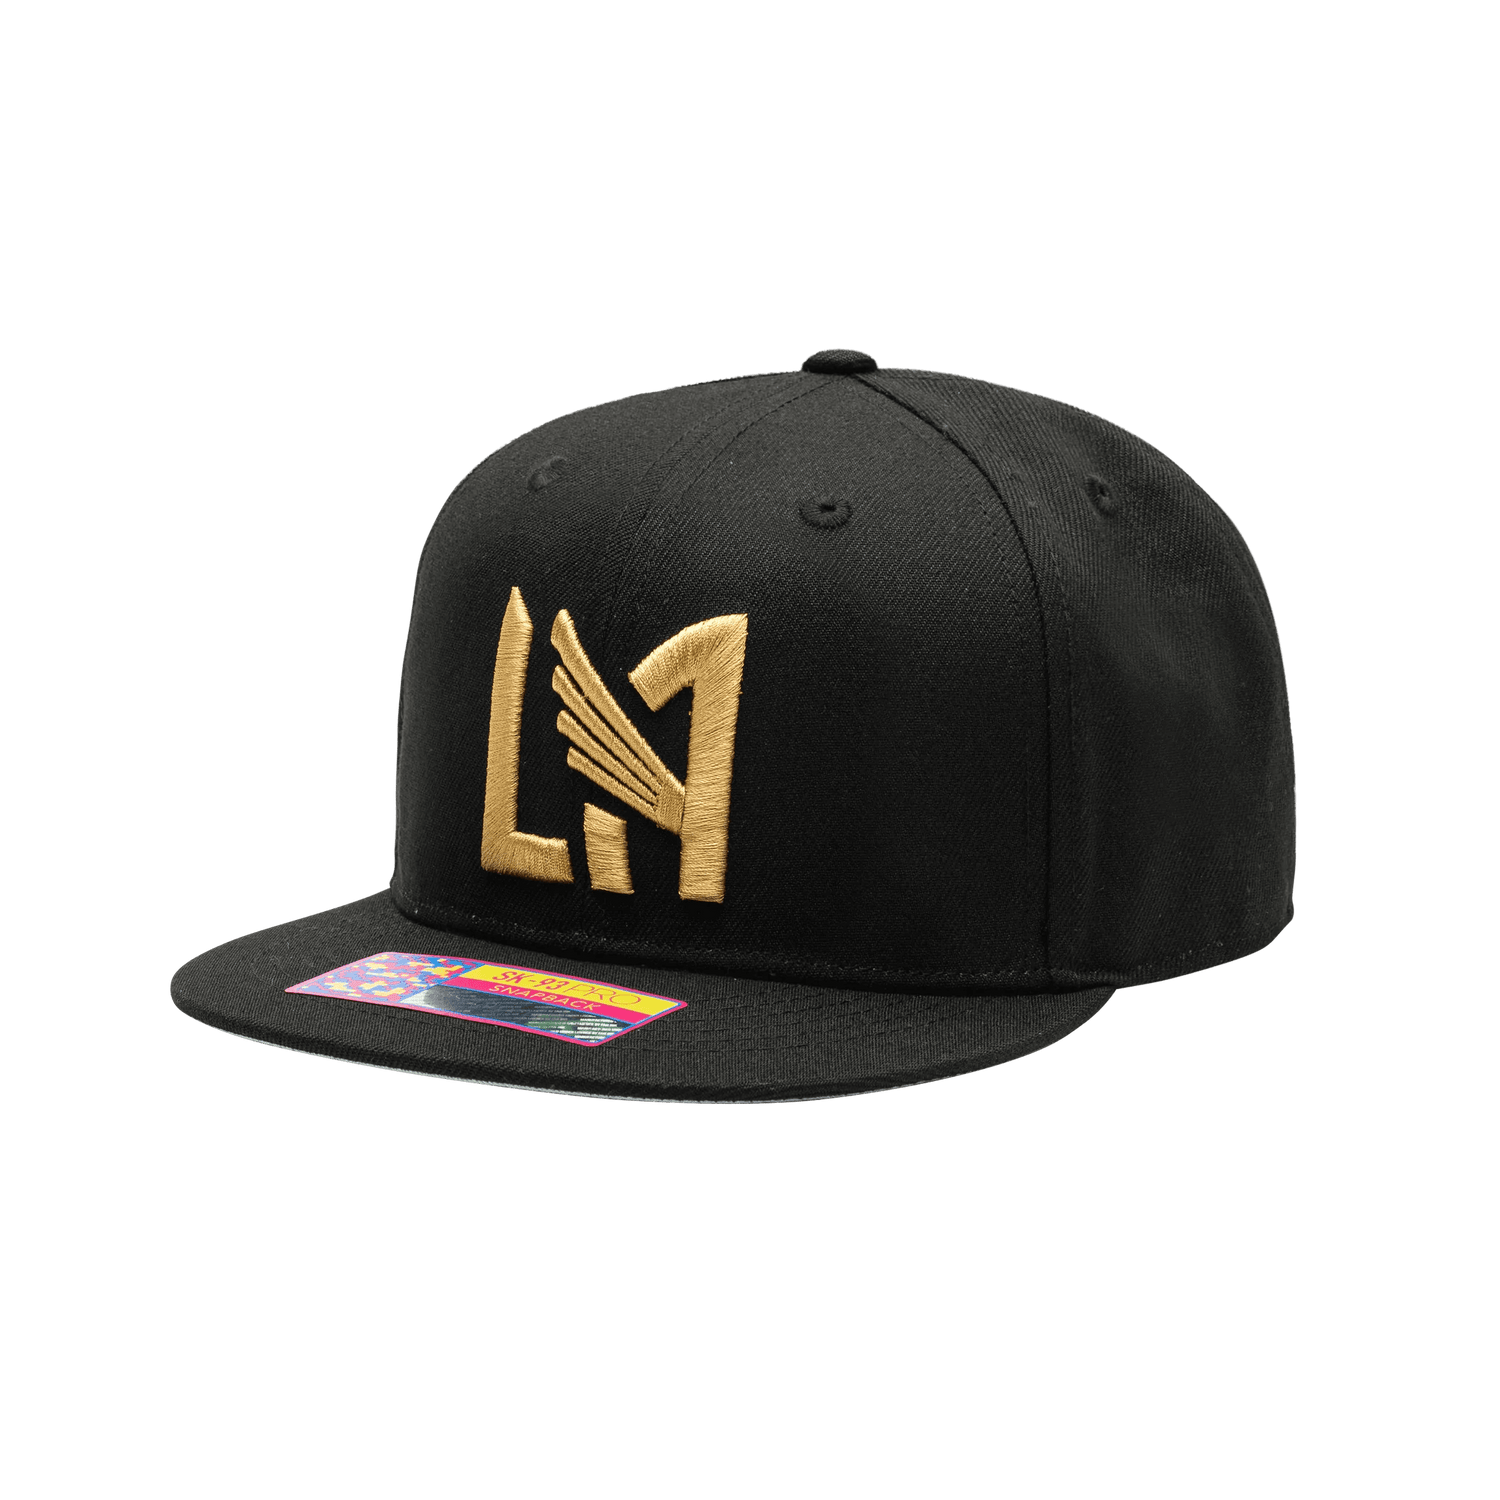 FI Collection LAFC Dawn Snapback Hat (Lateral - Side 1)